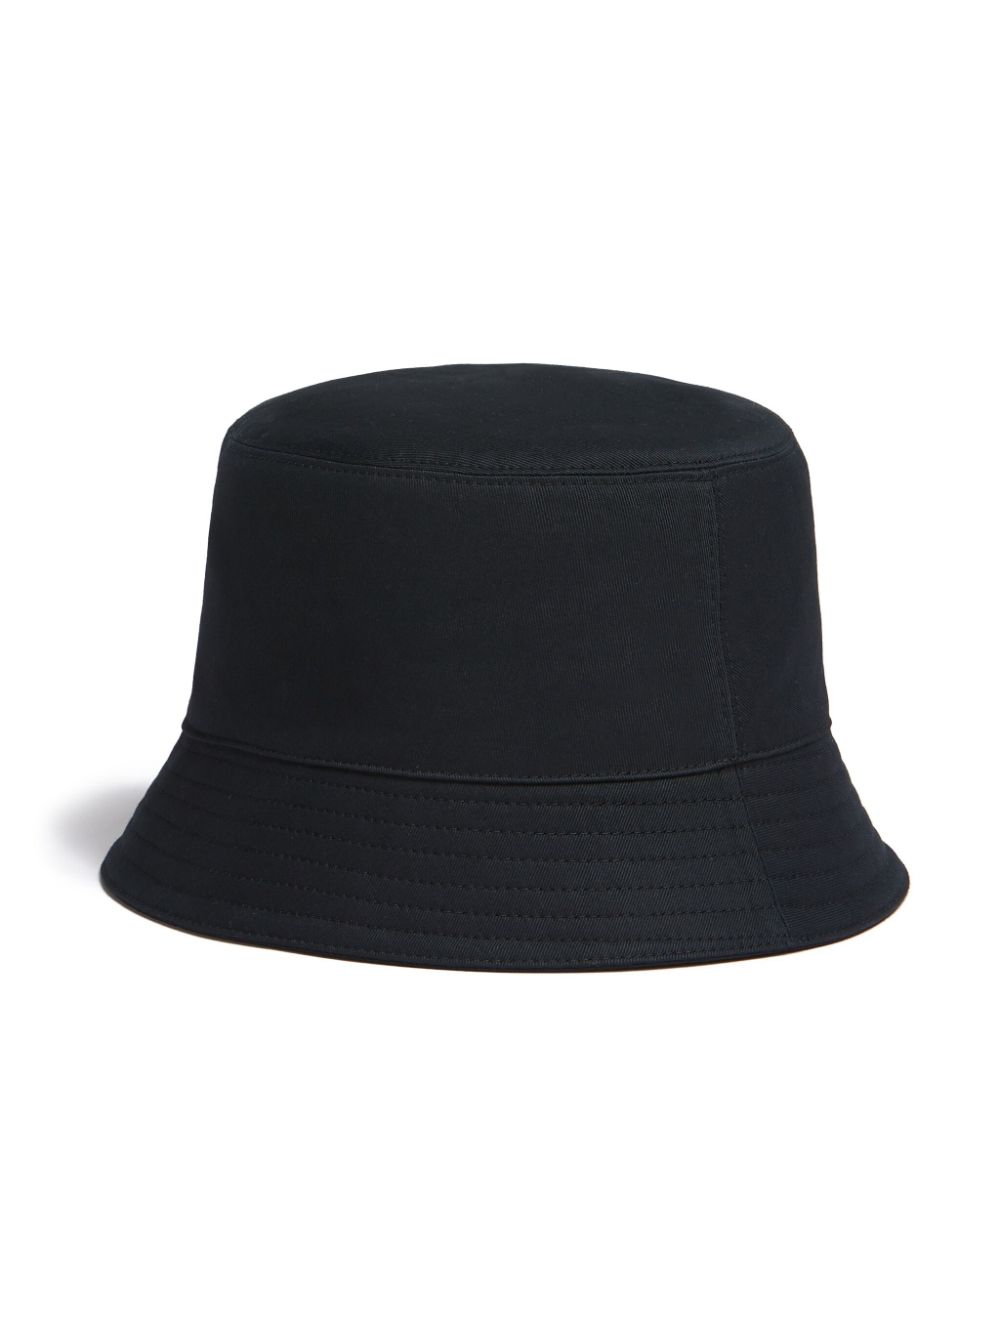 Logo-embroidered cotton bucket hat<BR/><BR/><BR/>